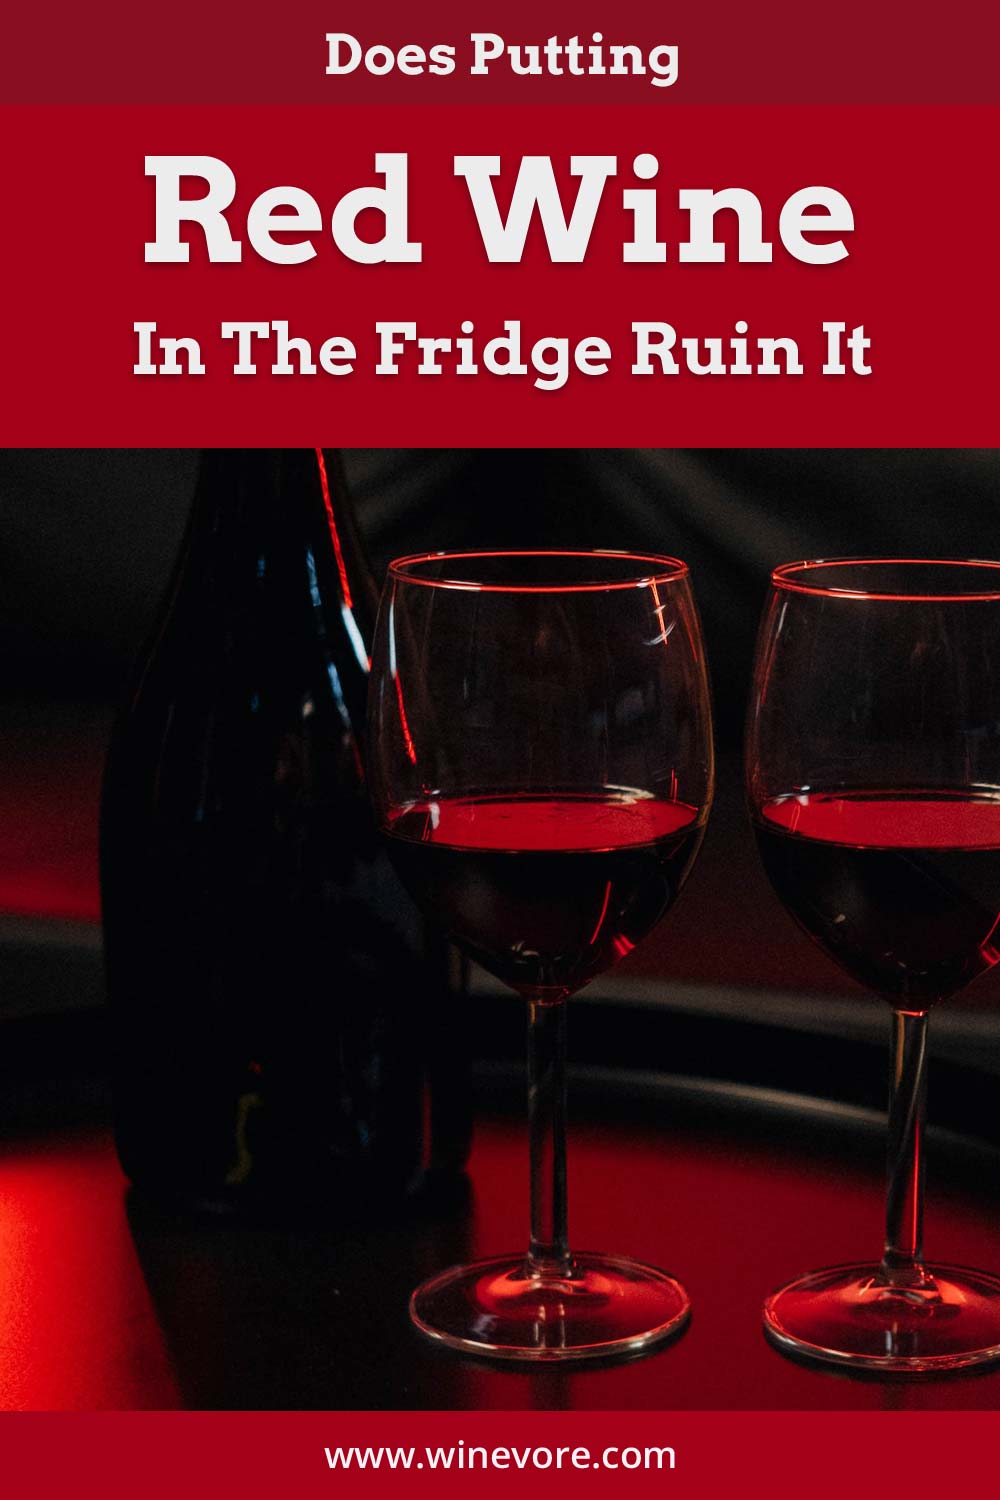 Two glasses of read wine with a bottle - Does putting them in the fridge ruin it?